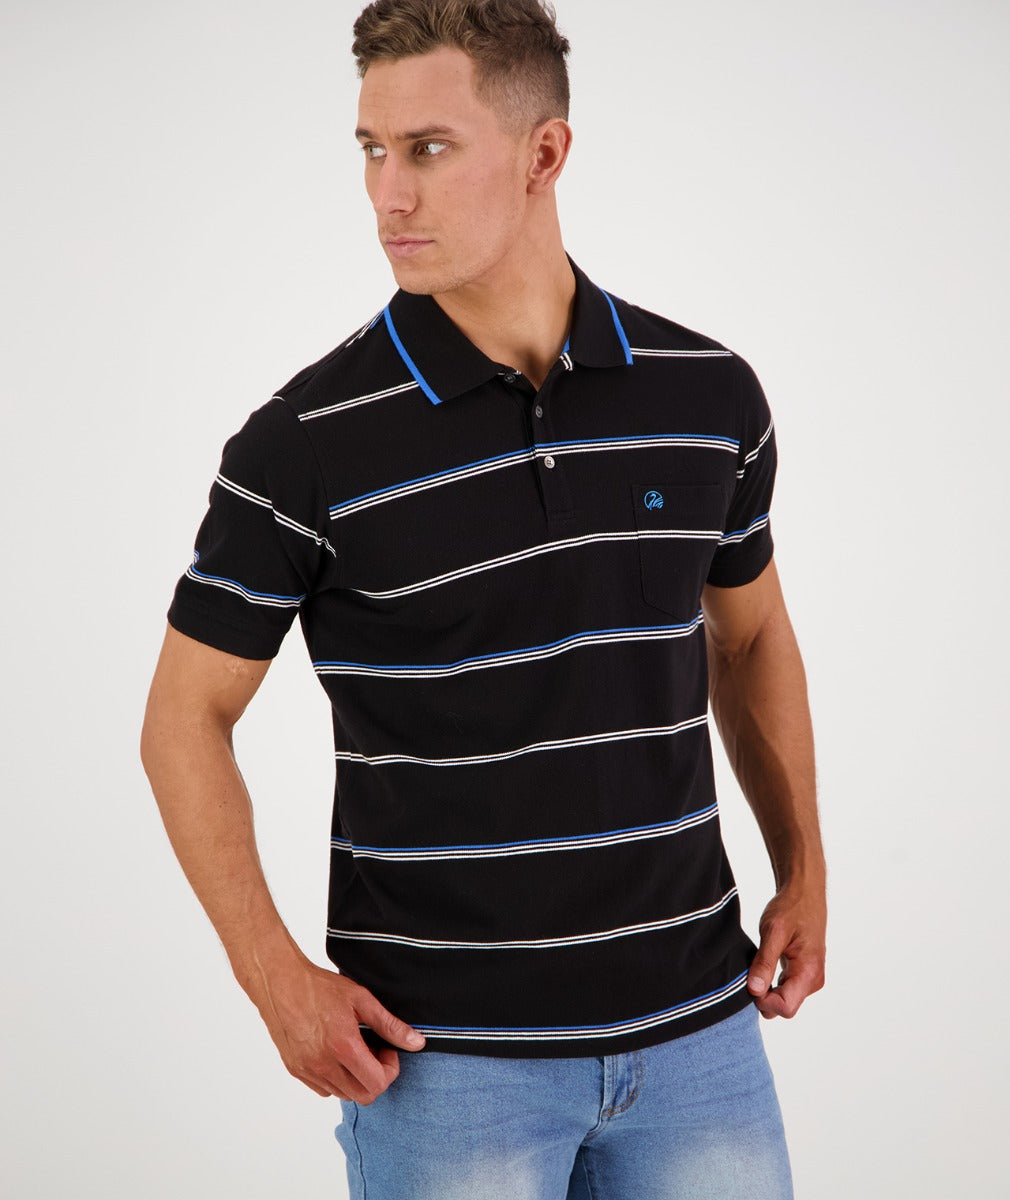 Swanndri Clothing Shirts, Jackets & Tees  Bairnsdale Horse Centre Tagged  Mens Polo's